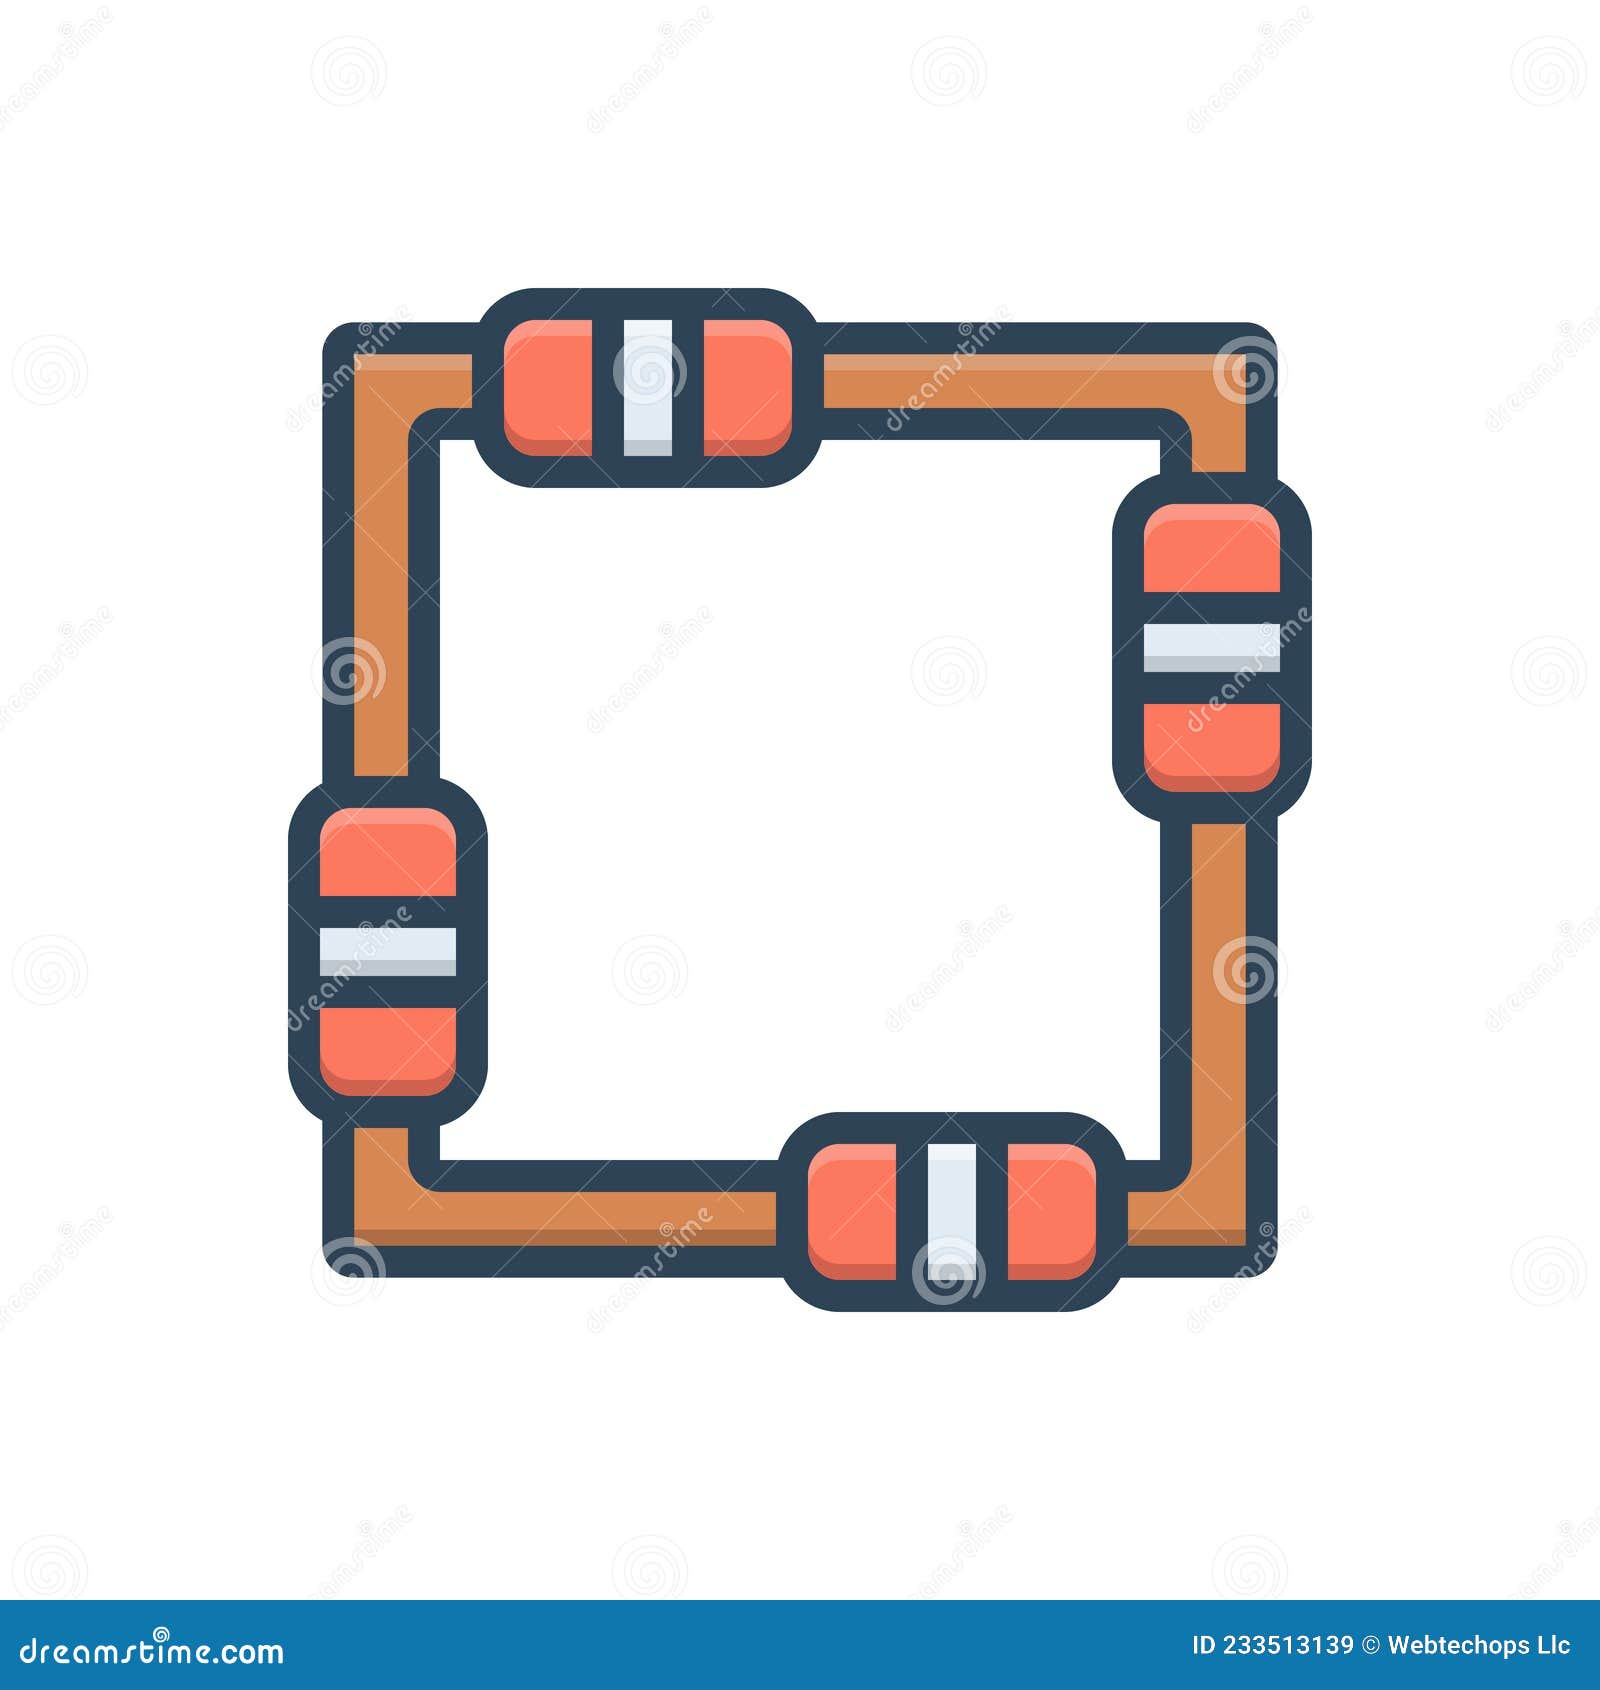 color  icon for support, espouse and endorse